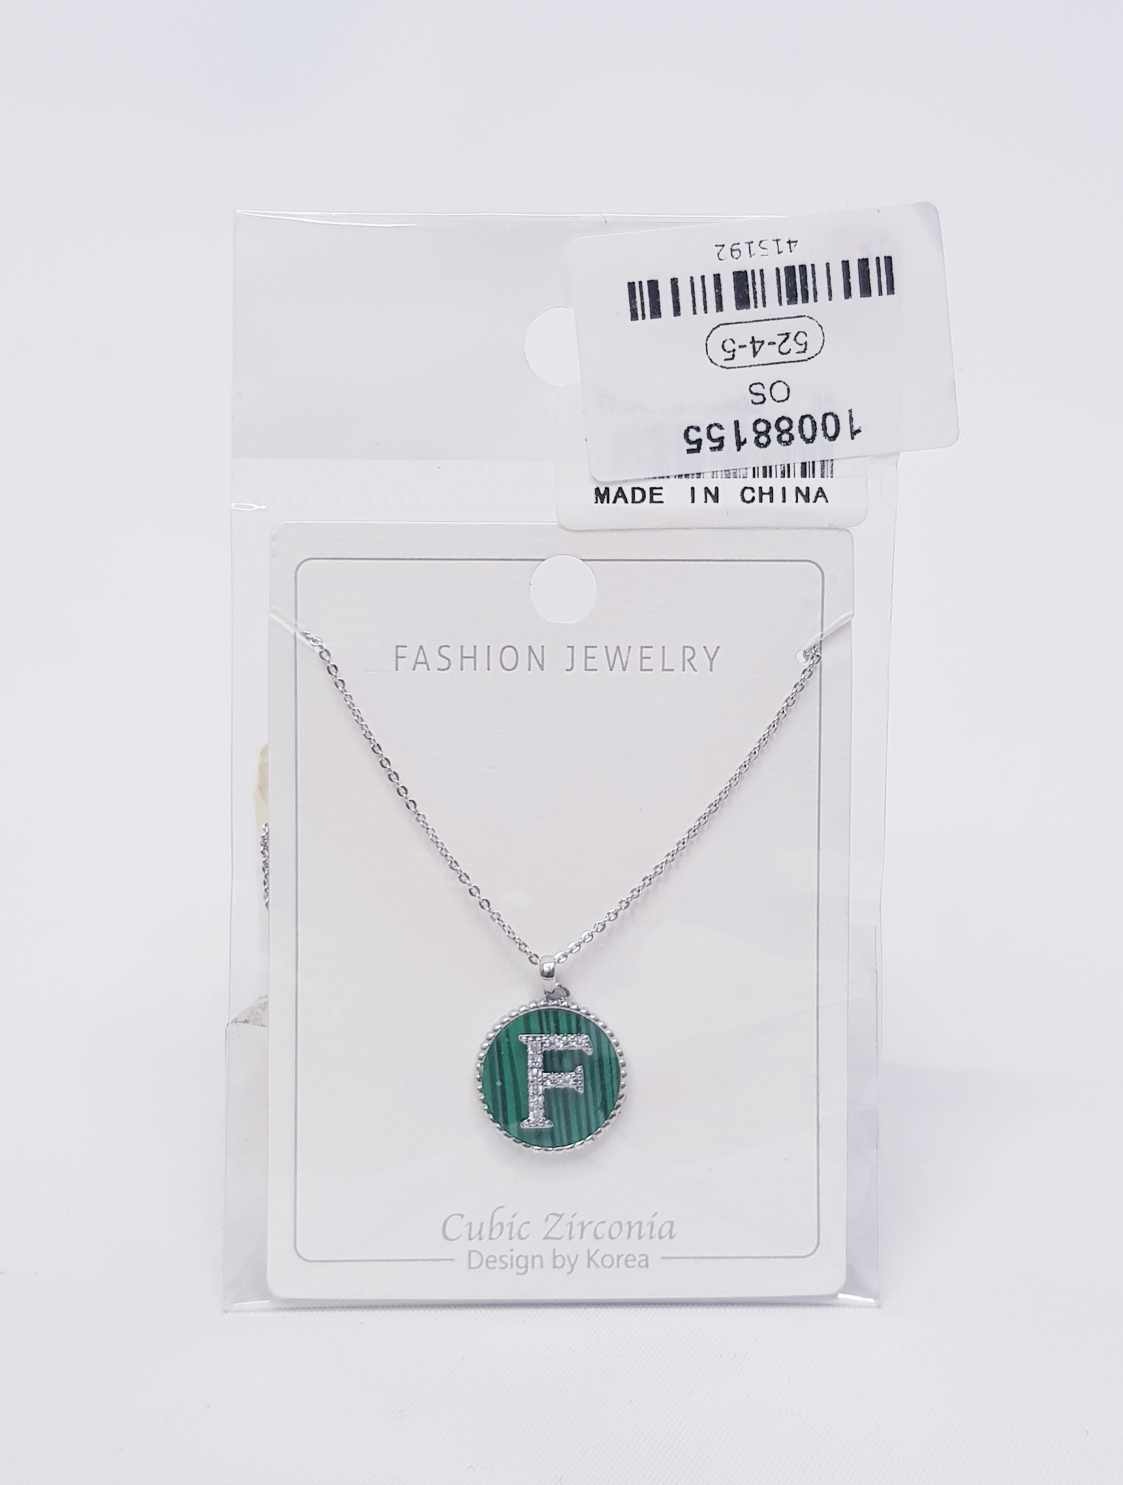 Jewelry set for ladies with the letters F